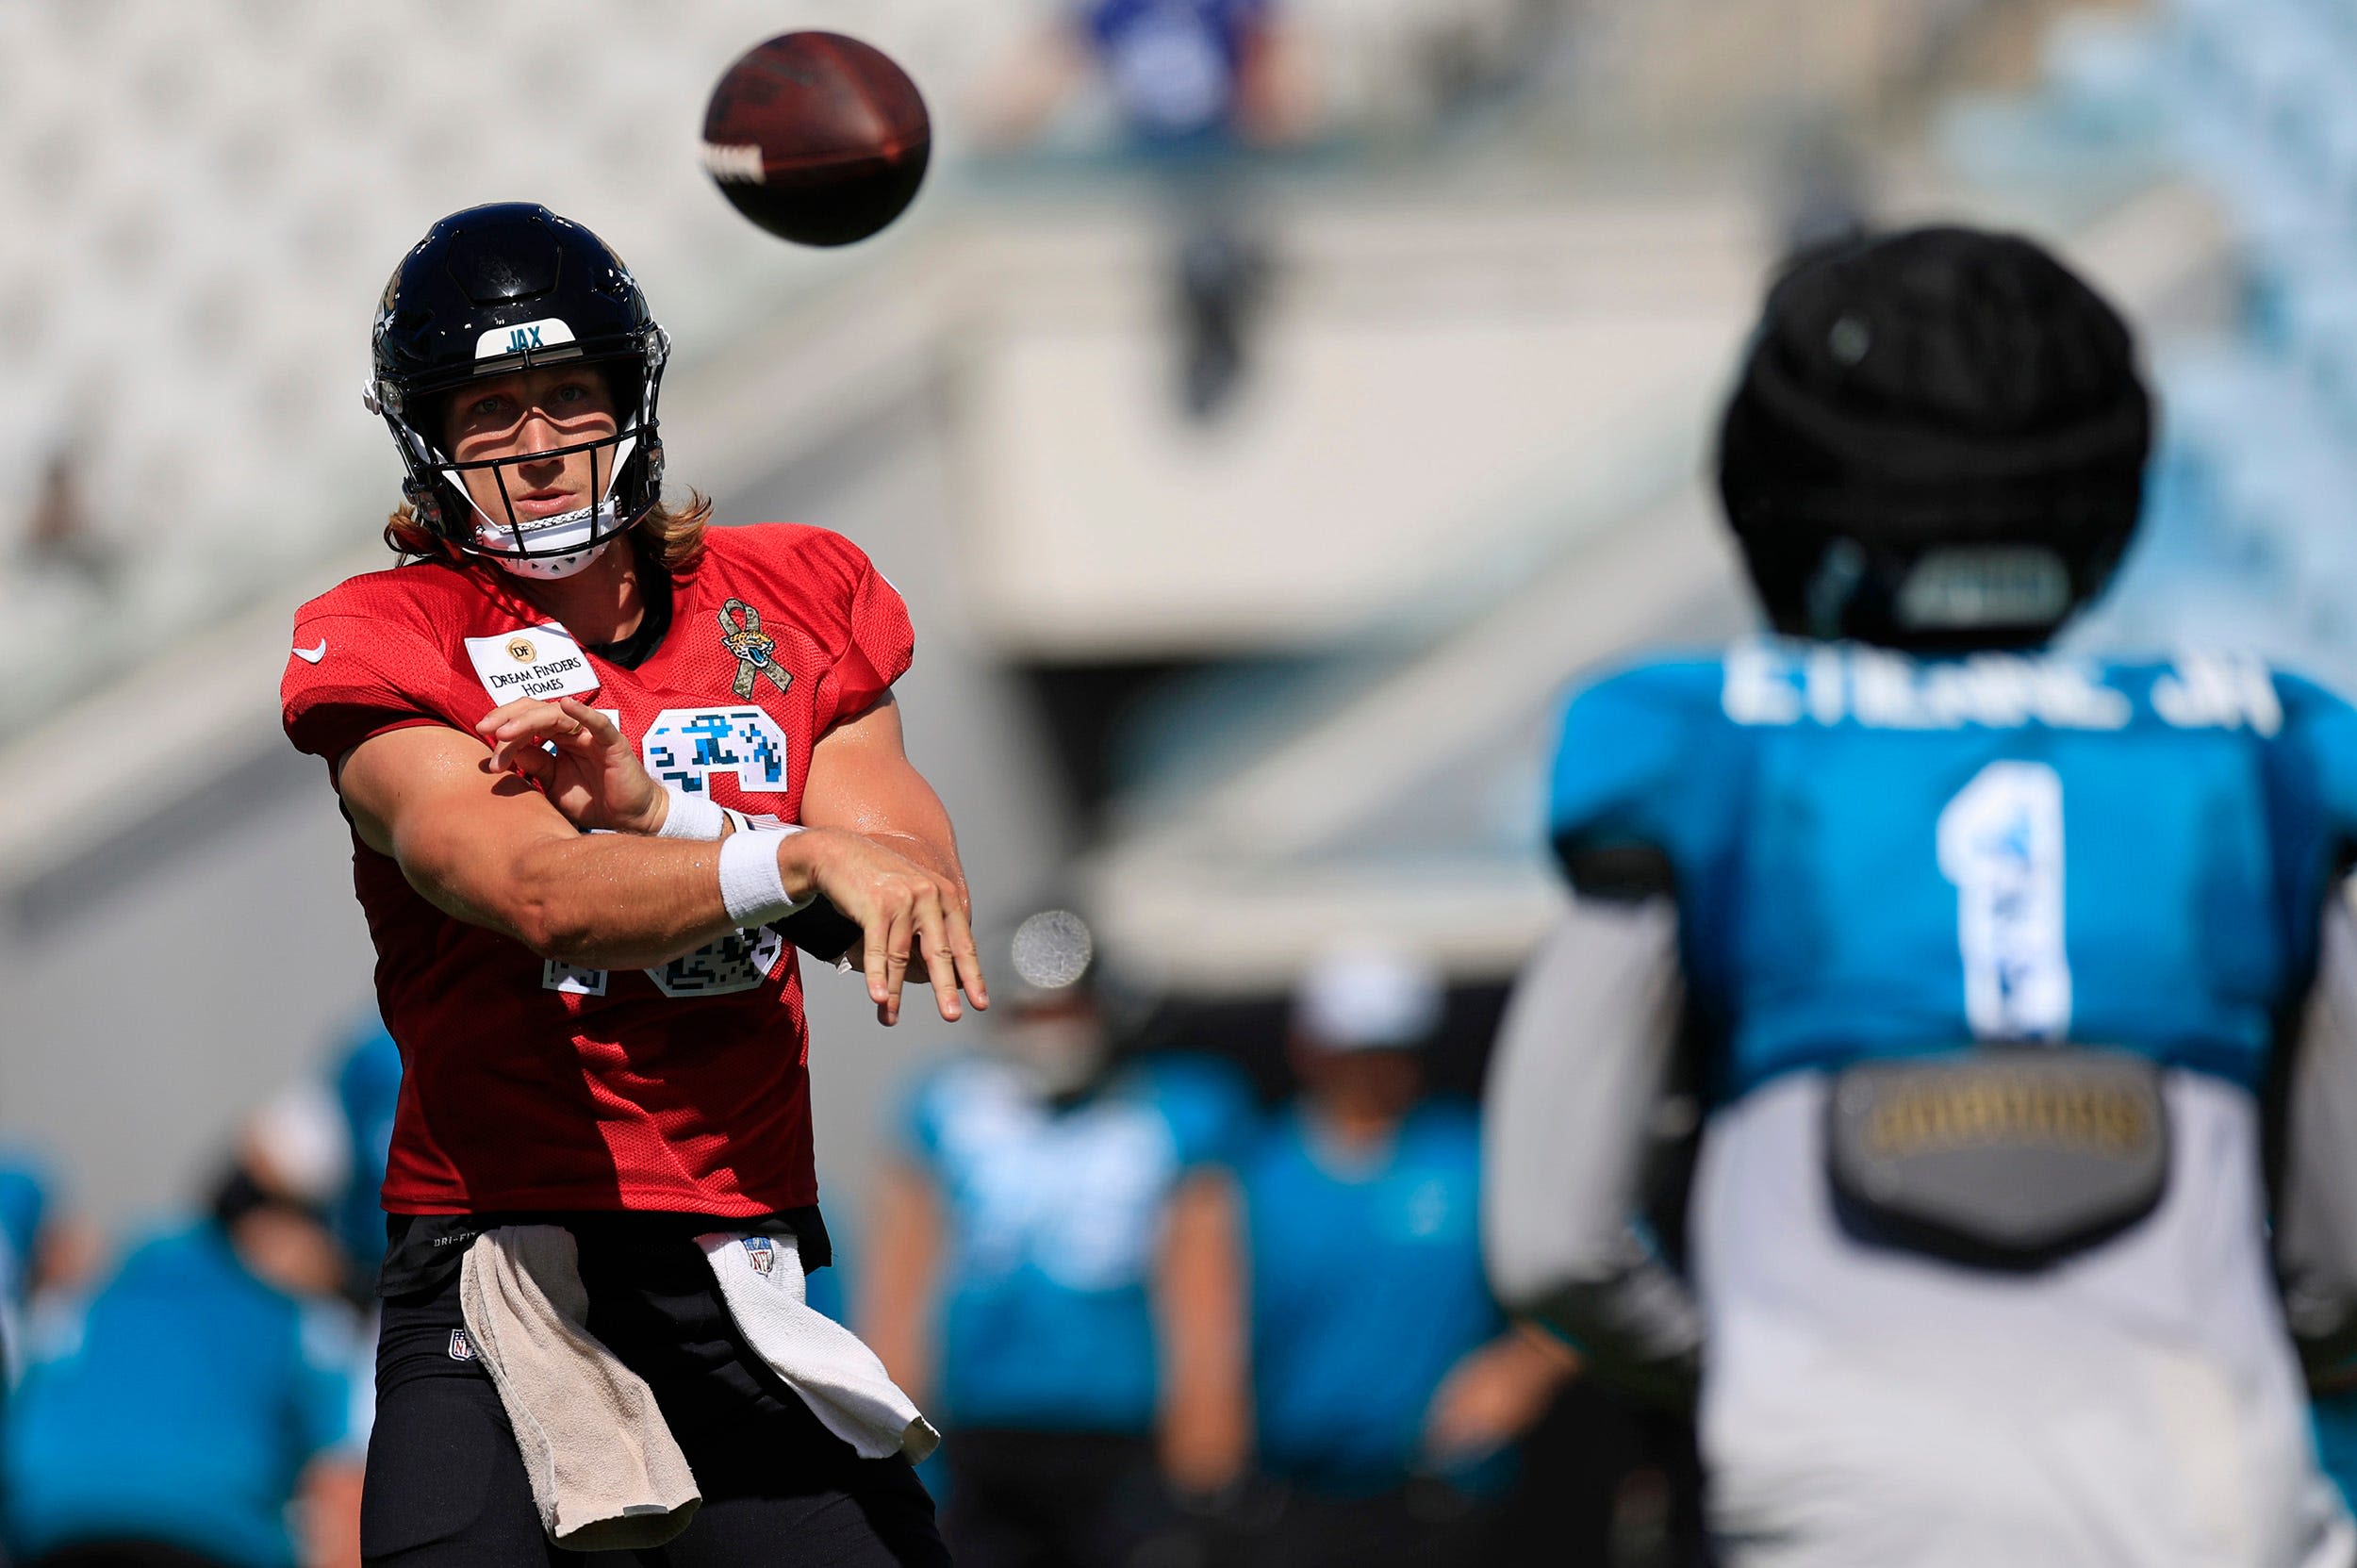 Jacksonville Jaguars QB Trevor Lawrence continues hot streak in camp, physicality ramps up